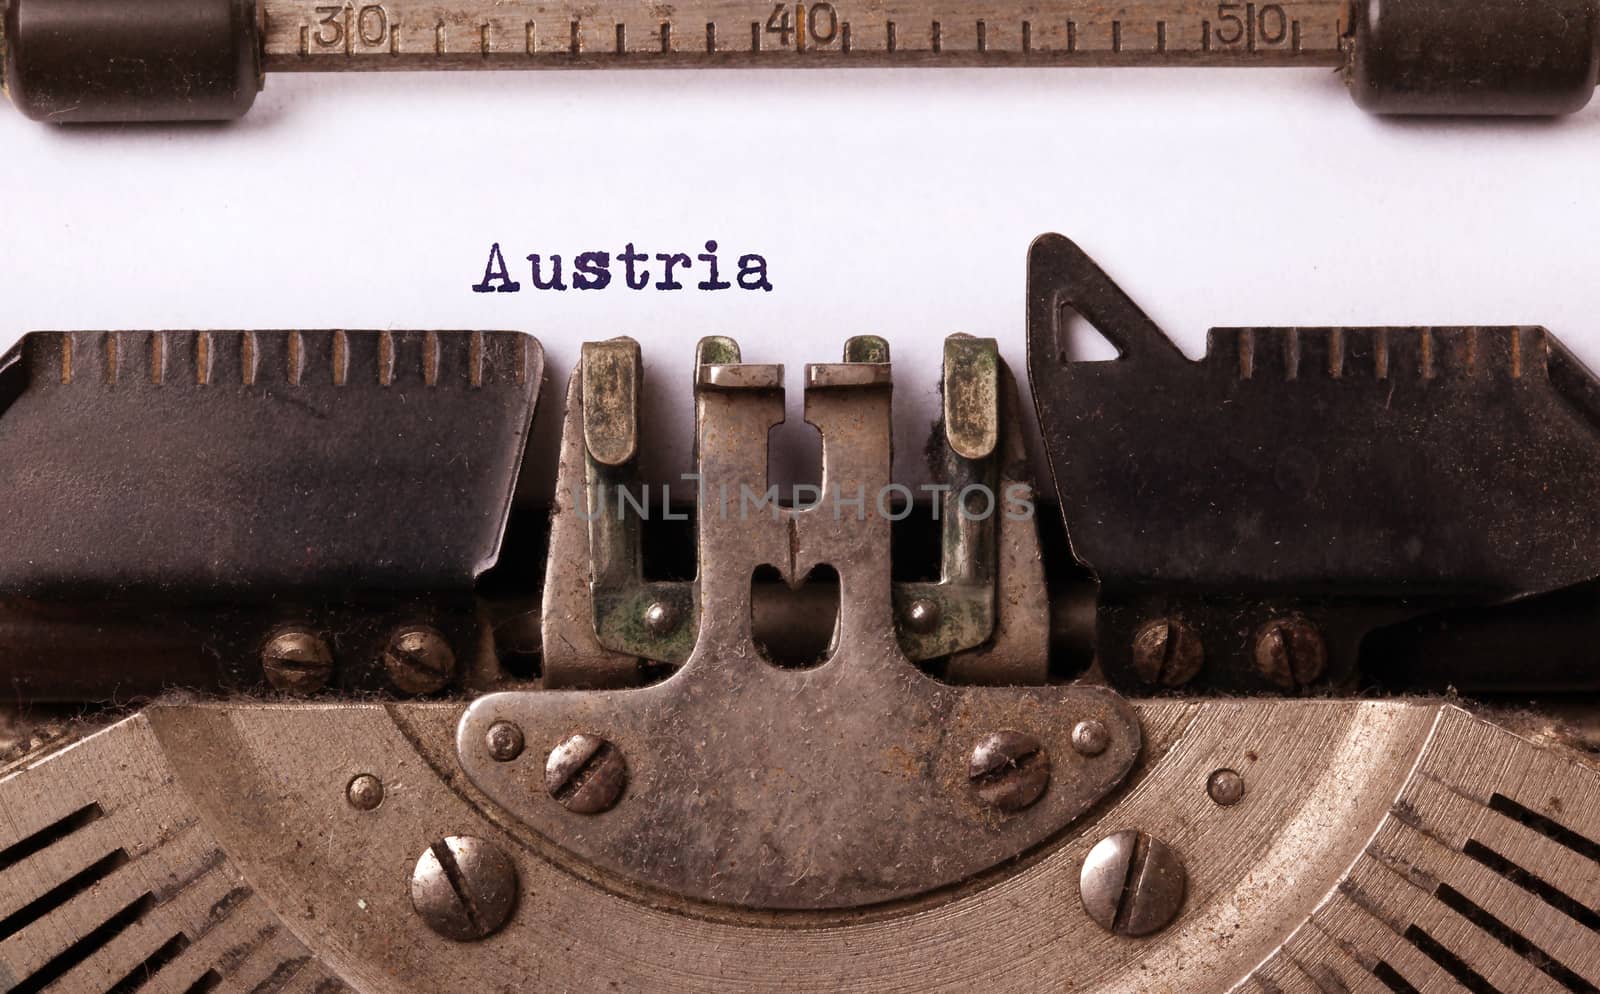 Inscription made by vinrage typewriter, country, Austria